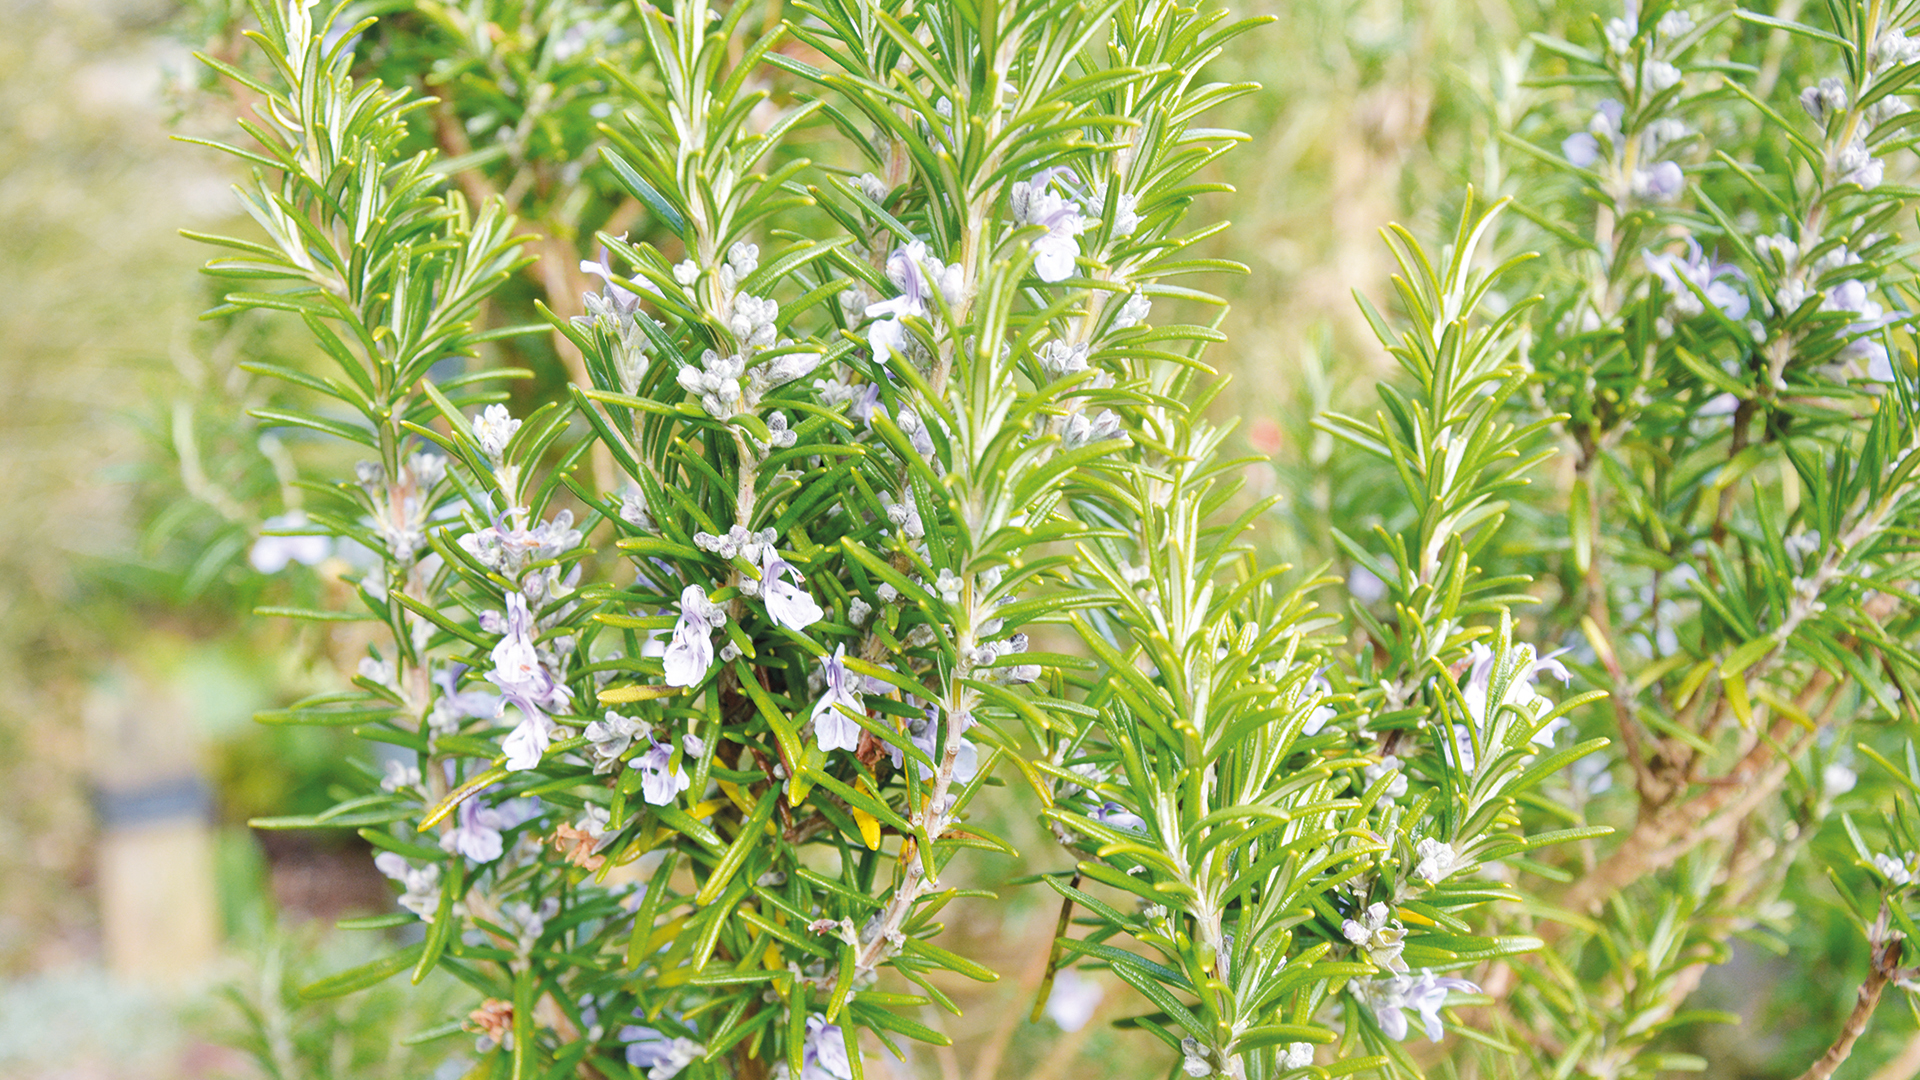 How to Grow Rosemary From Seed: 3 Tips for a Healthy Harvest – Sow